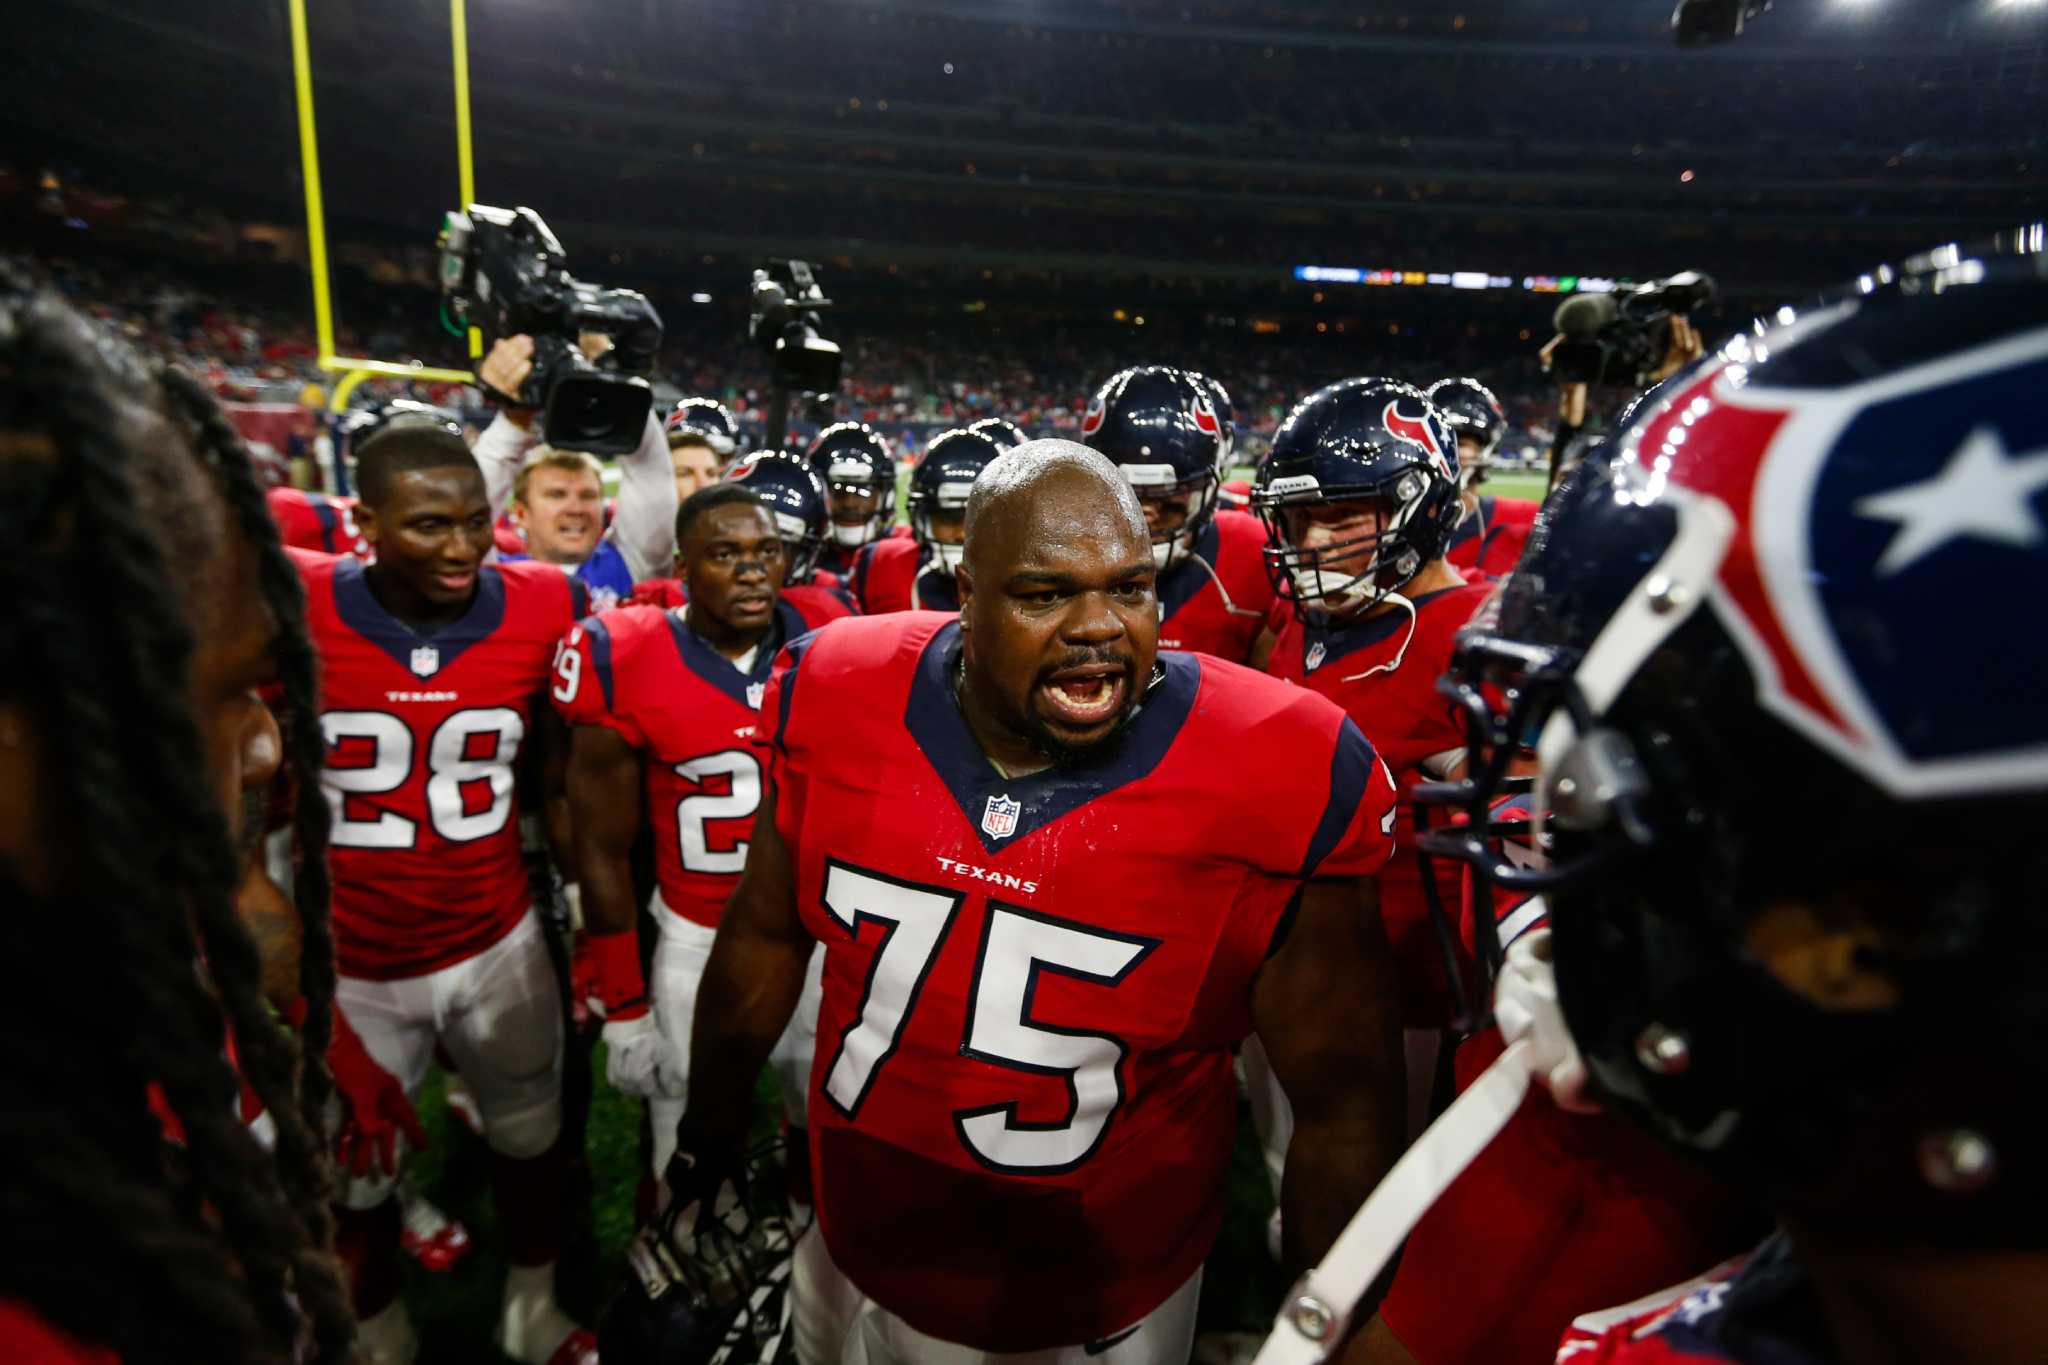 Vince Wilfork retires in sponsored video for charcoal company